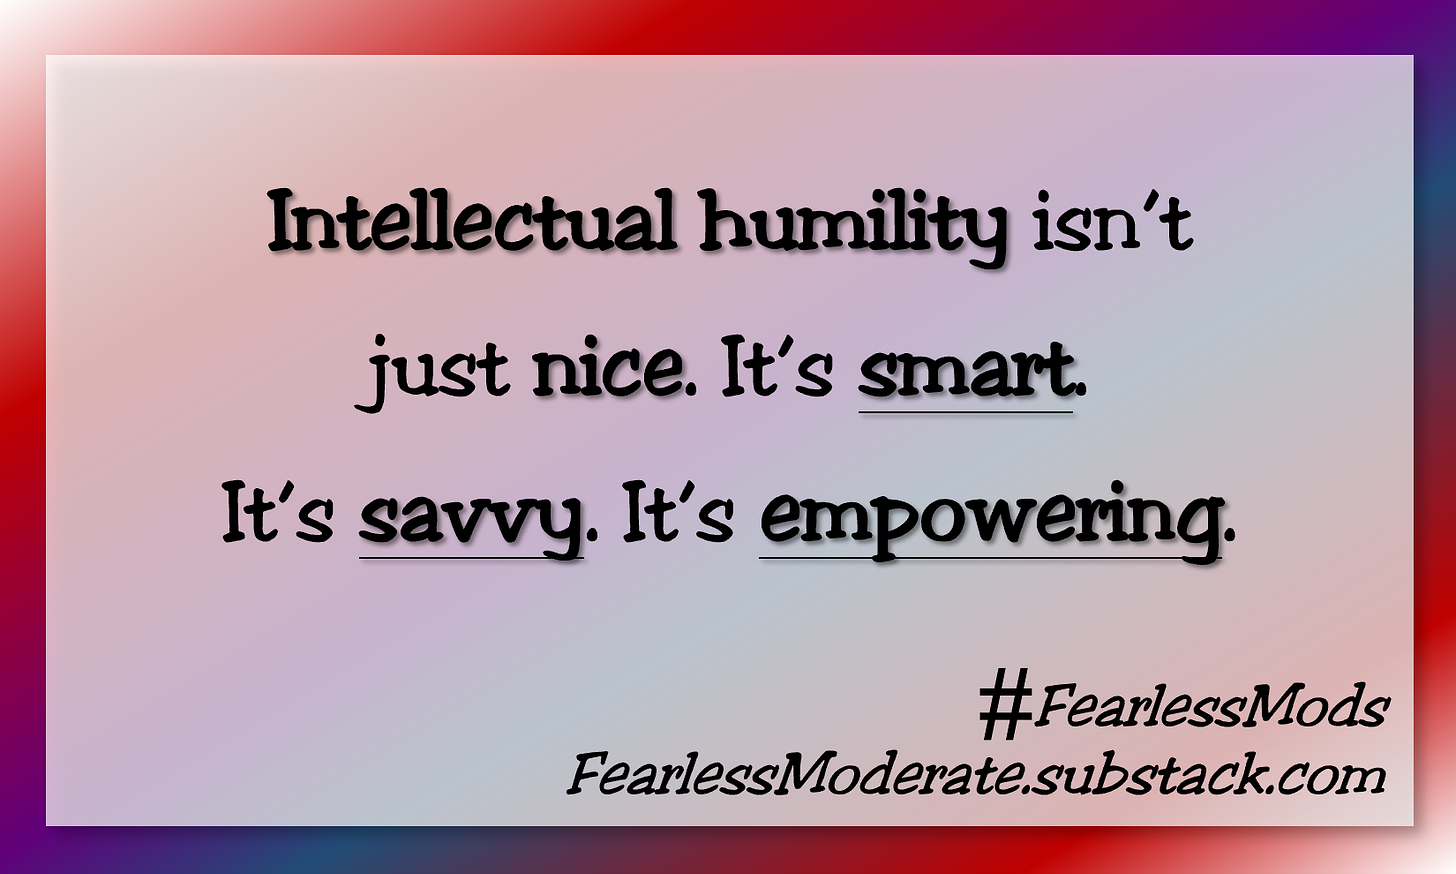 Intellectual humility isn't just nice. It's smart. It's savvy. It's empowering.